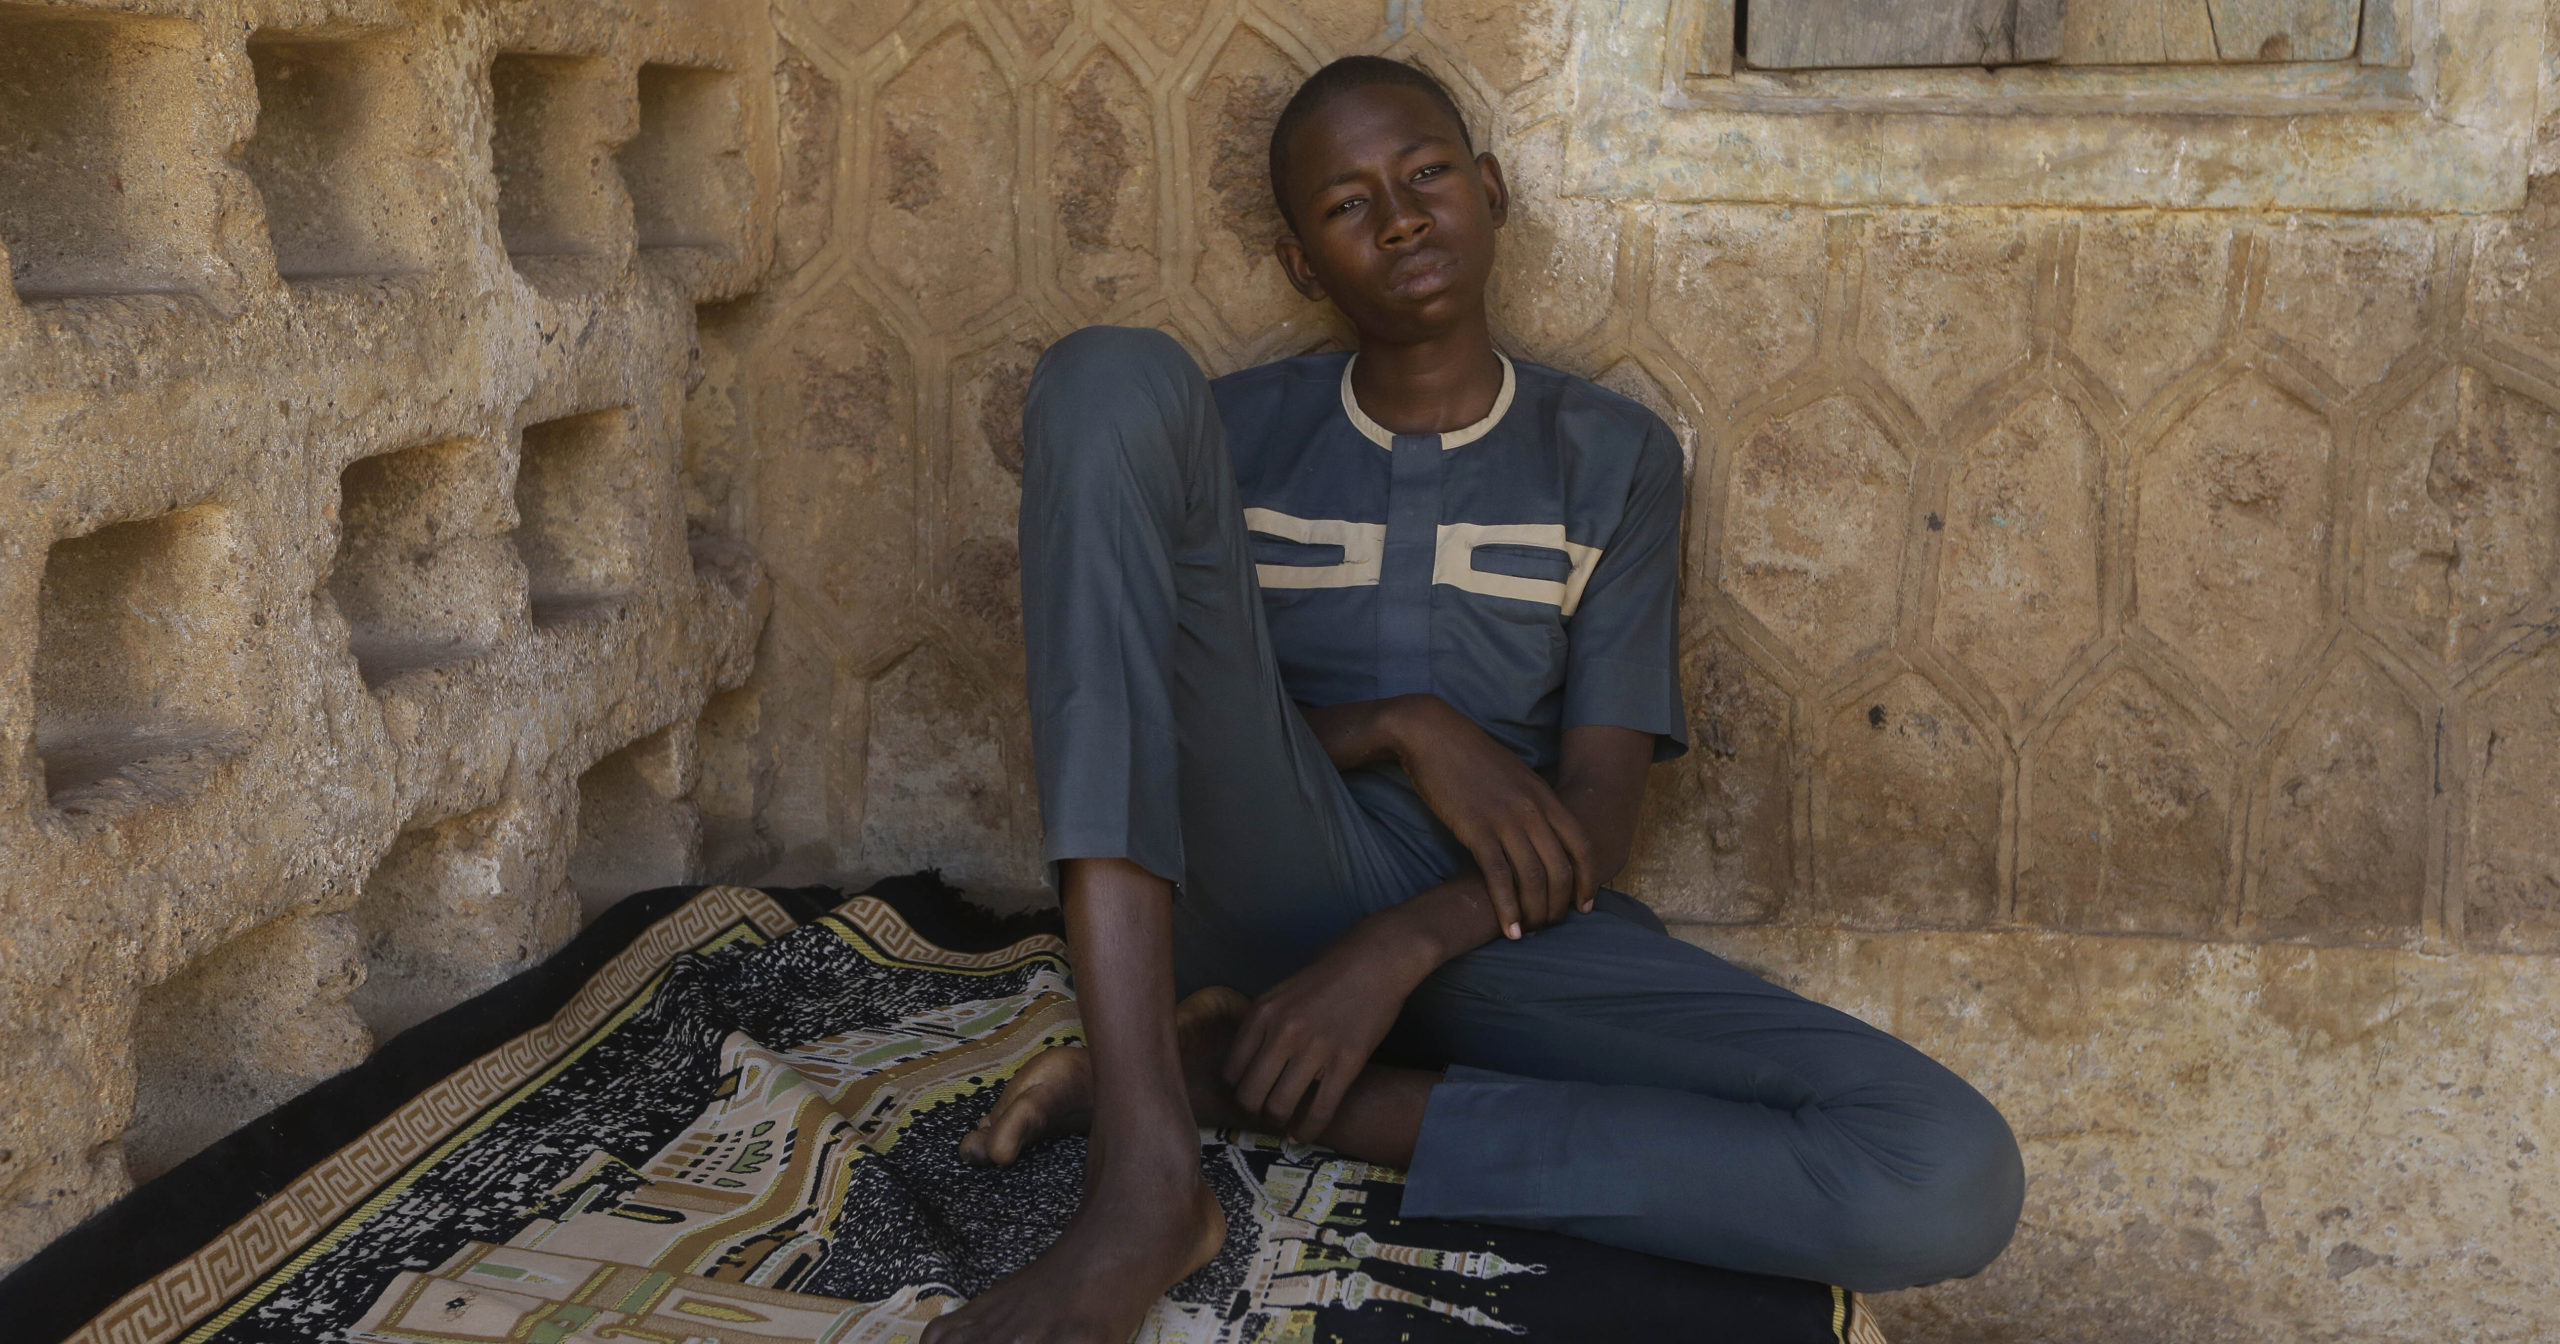 Usama Aminu, a 17-year-old student of the Government Science Secondary School who escaped from Boko Haram insurgents, sits for an interview with The Associated Press in Kankara, Nigeria, on Dec. 16, 2020.